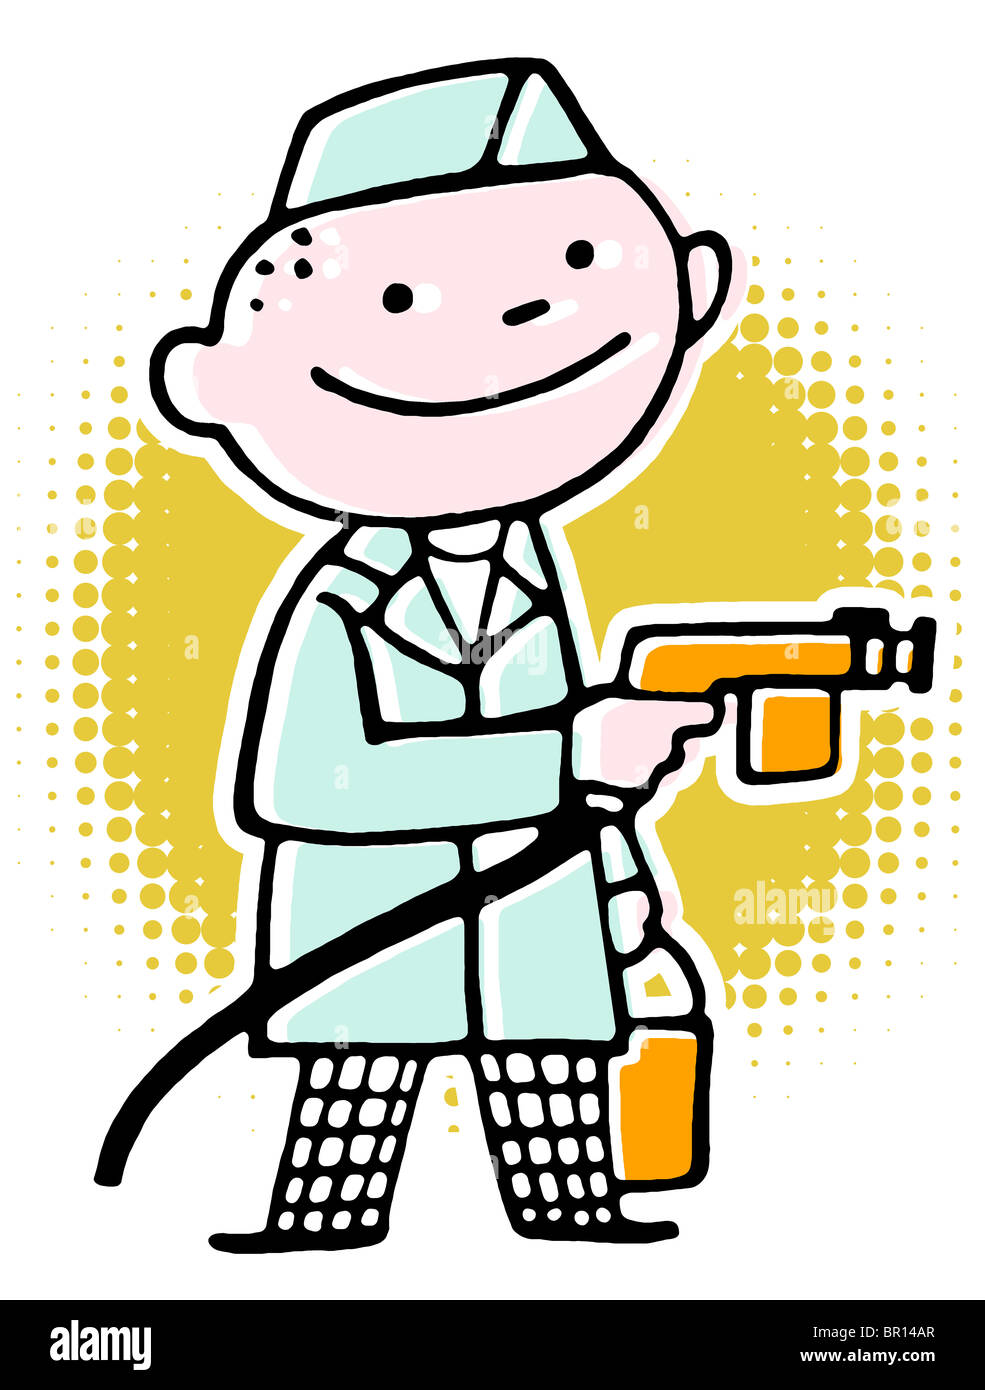 A cartoon style drawing of a man working as a car washer Stock Photo